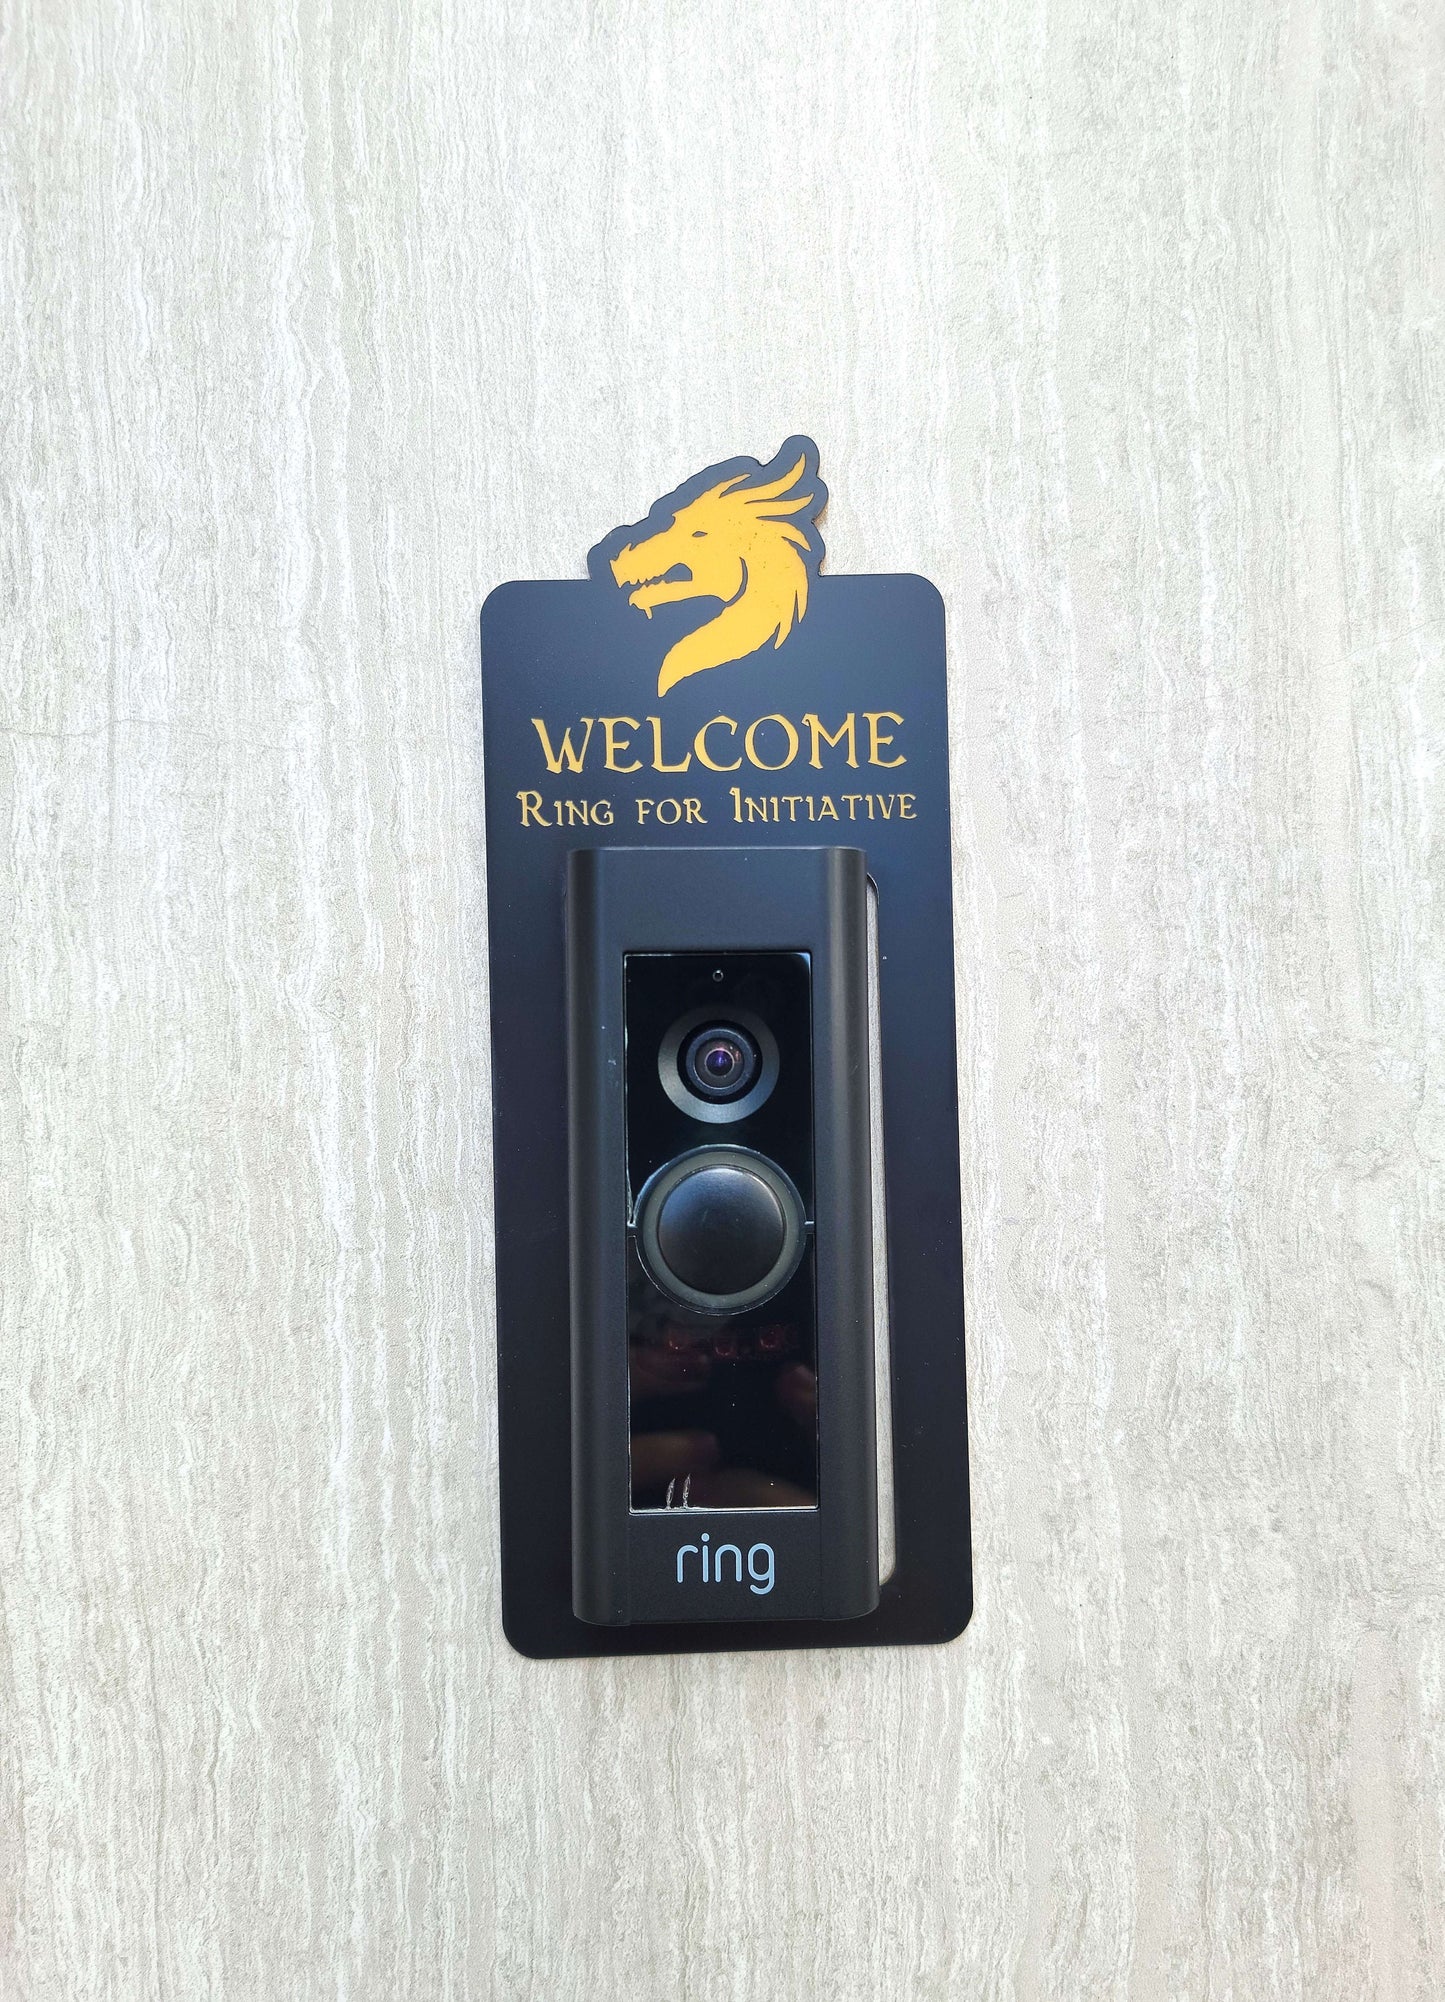 Black doorbell surround with gold dragon head and lettering stating Welcome Ring for Initiative around Ring doorbell on gray background